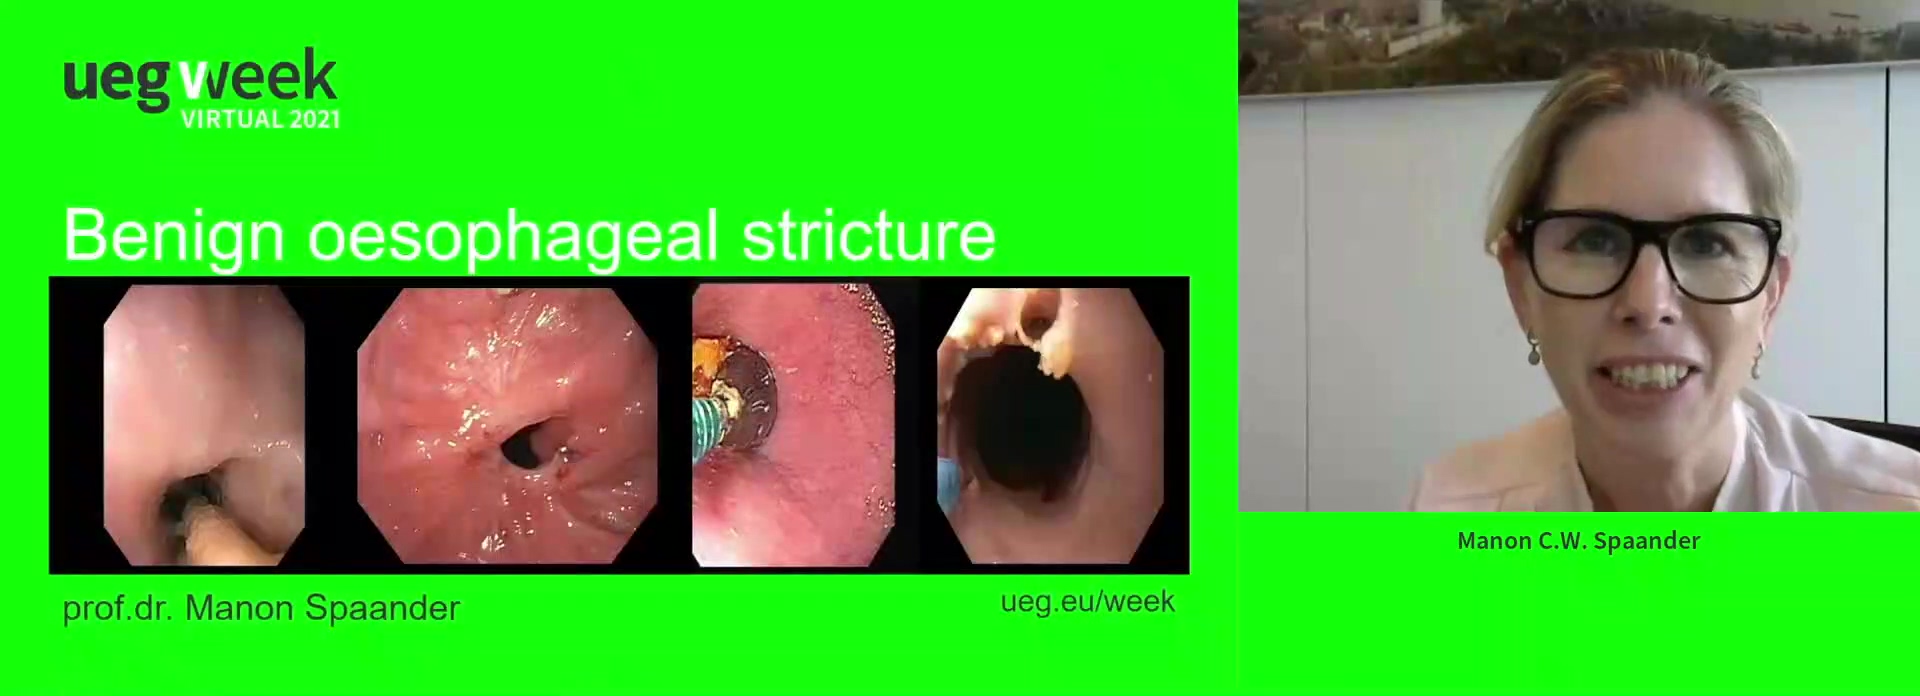 Benign oesophageal stricture